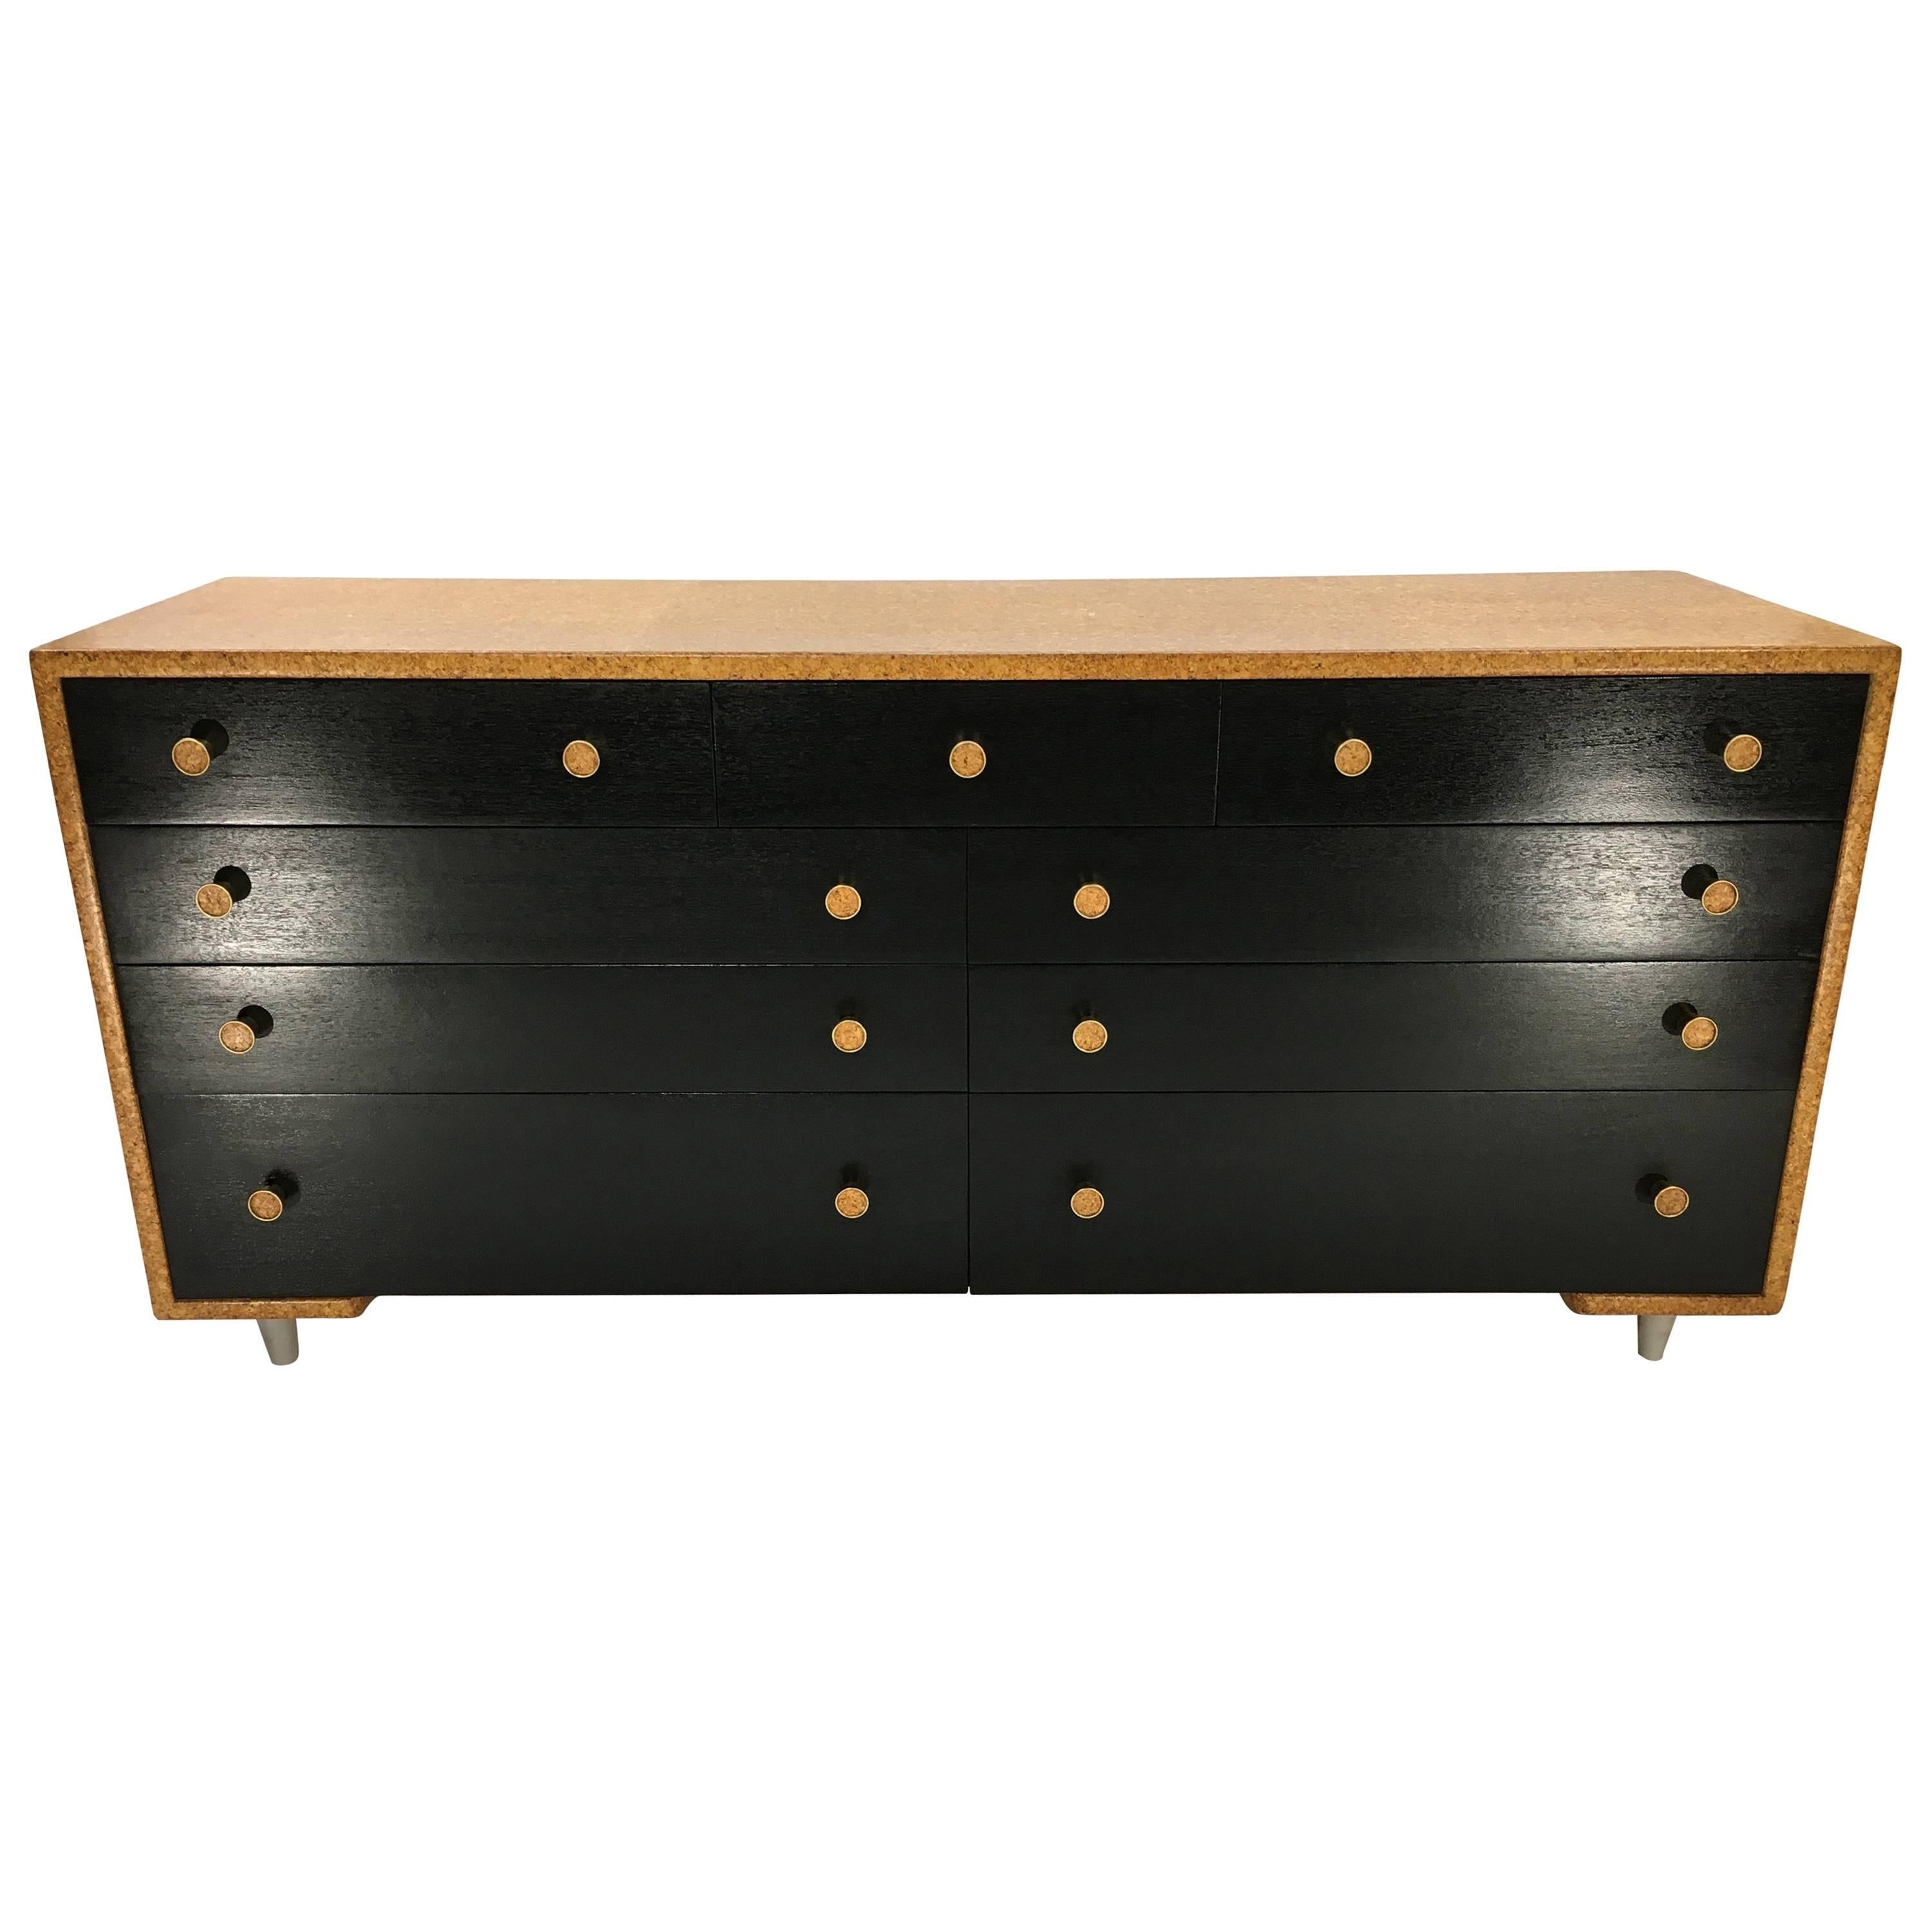 Early Cork Clad Dresser by Paul Frankl for Johnson Furniture Company